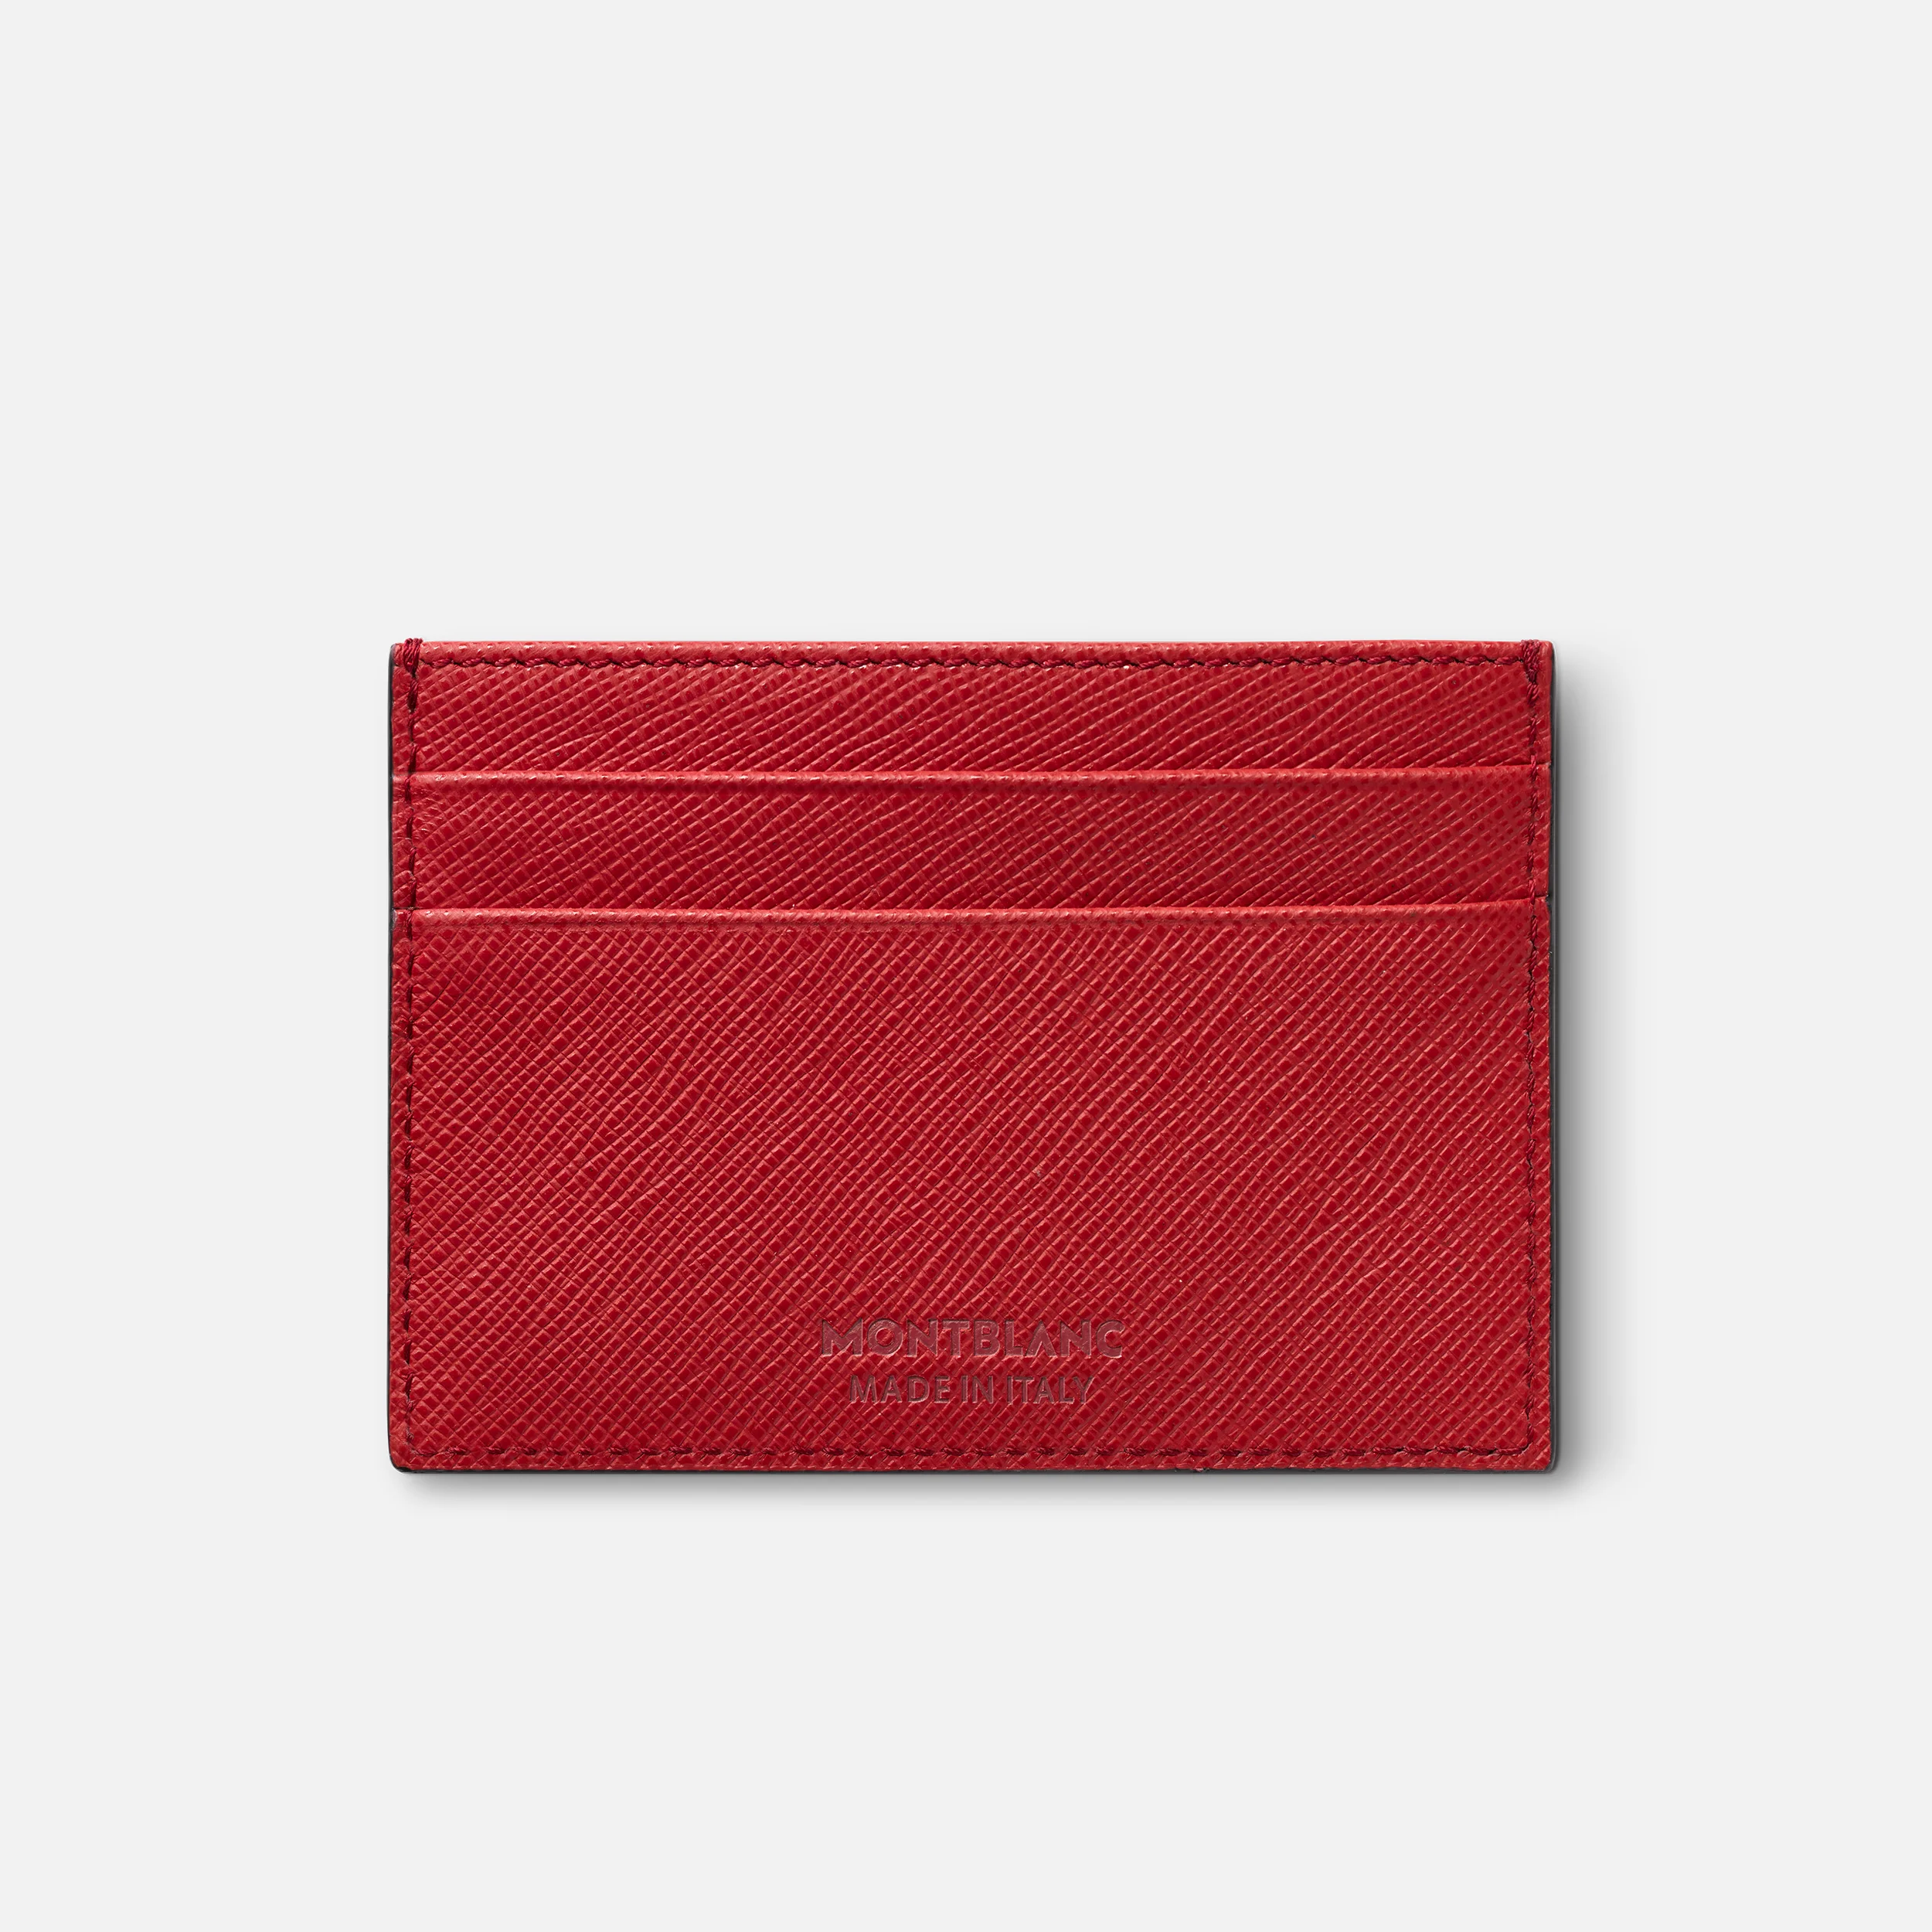 Montblanc Sartorial Card Holder 5cc Red - Pencraft the boutique